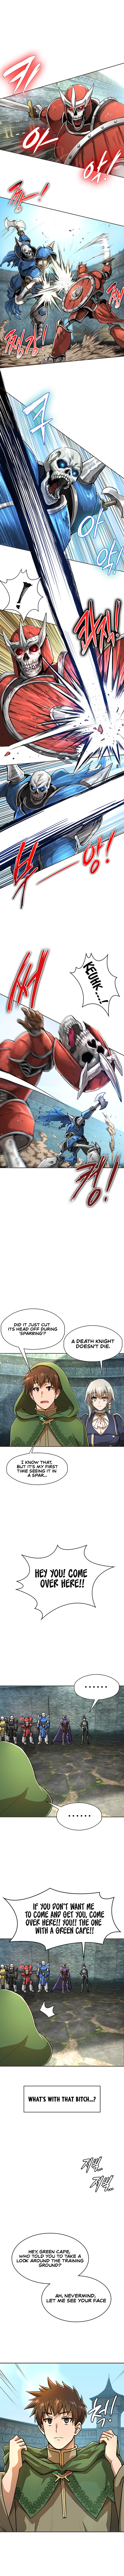 Bought By The Demon King Bought By The Demon Lord Before The Ending - Chapter 1 - Omega Scans